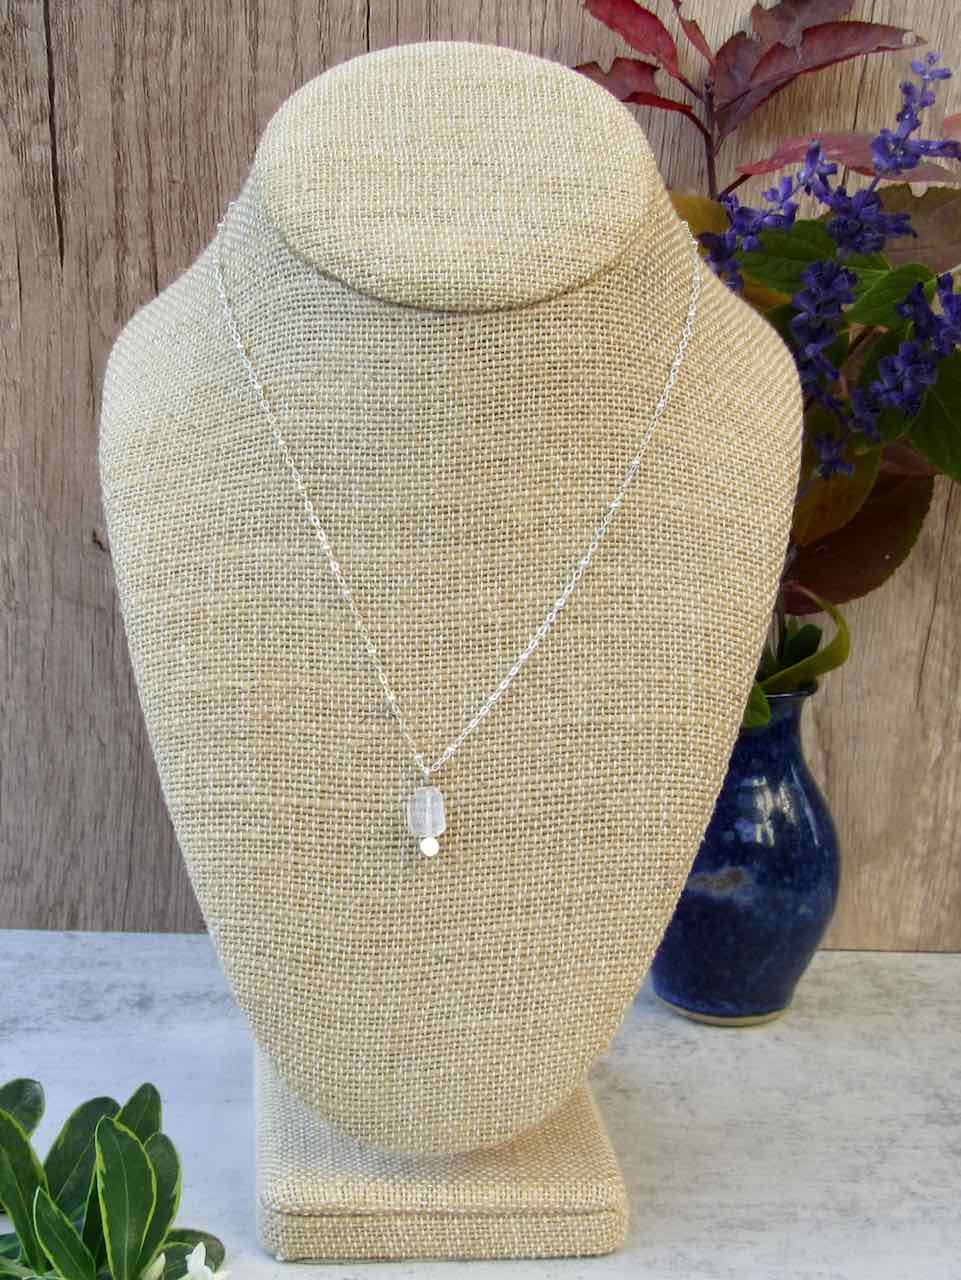 Moonstone Charm Necklace